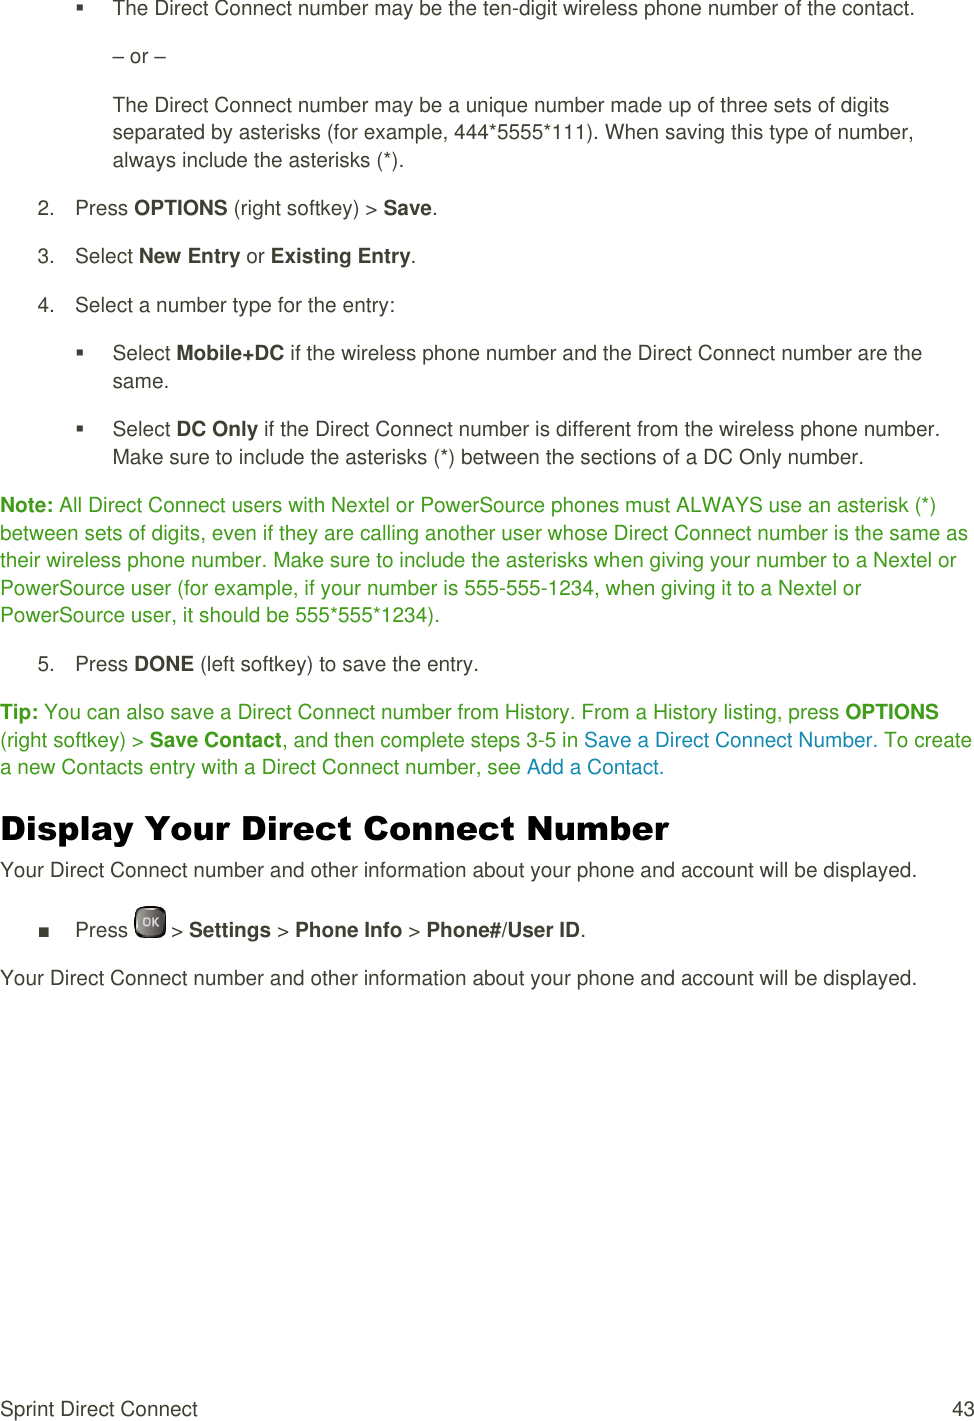  Sprint Direct Connect  43   The Direct Connect number may be the ten-digit wireless phone number of the contact. – or – The Direct Connect number may be a unique number made up of three sets of digits separated by asterisks (for example, 444*5555*111). When saving this type of number, always include the asterisks (*). 2.  Press OPTIONS (right softkey) &gt; Save. 3.  Select New Entry or Existing Entry. 4.  Select a number type for the entry:   Select Mobile+DC if the wireless phone number and the Direct Connect number are the same.   Select DC Only if the Direct Connect number is different from the wireless phone number. Make sure to include the asterisks (*) between the sections of a DC Only number. Note: All Direct Connect users with Nextel or PowerSource phones must ALWAYS use an asterisk (*) between sets of digits, even if they are calling another user whose Direct Connect number is the same as their wireless phone number. Make sure to include the asterisks when giving your number to a Nextel or PowerSource user (for example, if your number is 555-555-1234, when giving it to a Nextel or PowerSource user, it should be 555*555*1234). 5.  Press DONE (left softkey) to save the entry. Tip: You can also save a Direct Connect number from History. From a History listing, press OPTIONS (right softkey) &gt; Save Contact, and then complete steps 3-5 in Save a Direct Connect Number. To create a new Contacts entry with a Direct Connect number, see Add a Contact. Display Your Direct Connect Number Your Direct Connect number and other information about your phone and account will be displayed. ■  Press   &gt; Settings &gt; Phone Info &gt; Phone#/User ID. Your Direct Connect number and other information about your phone and account will be displayed.   